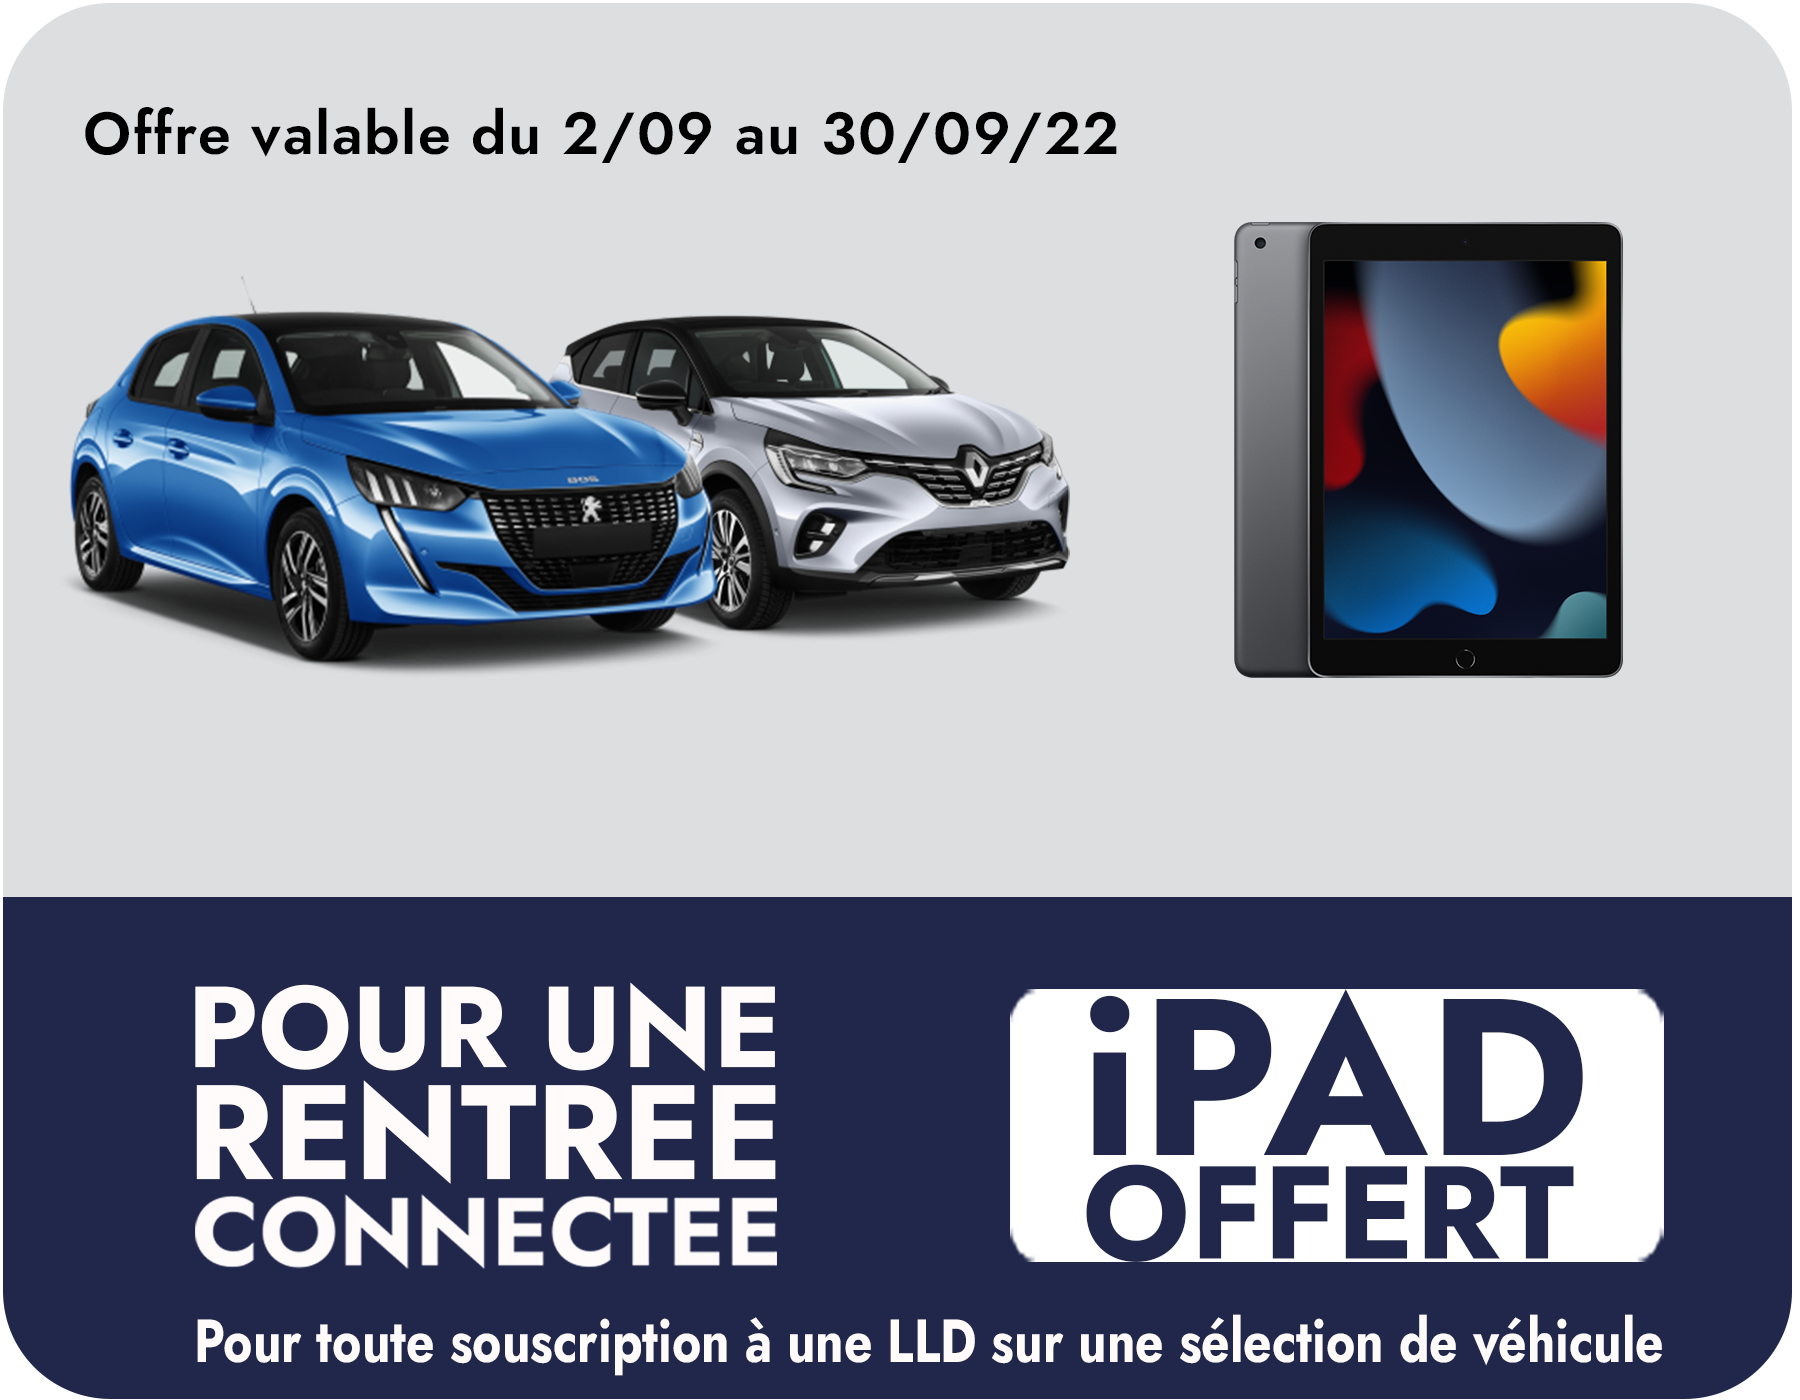 Leasing Offre Promotion Ipad